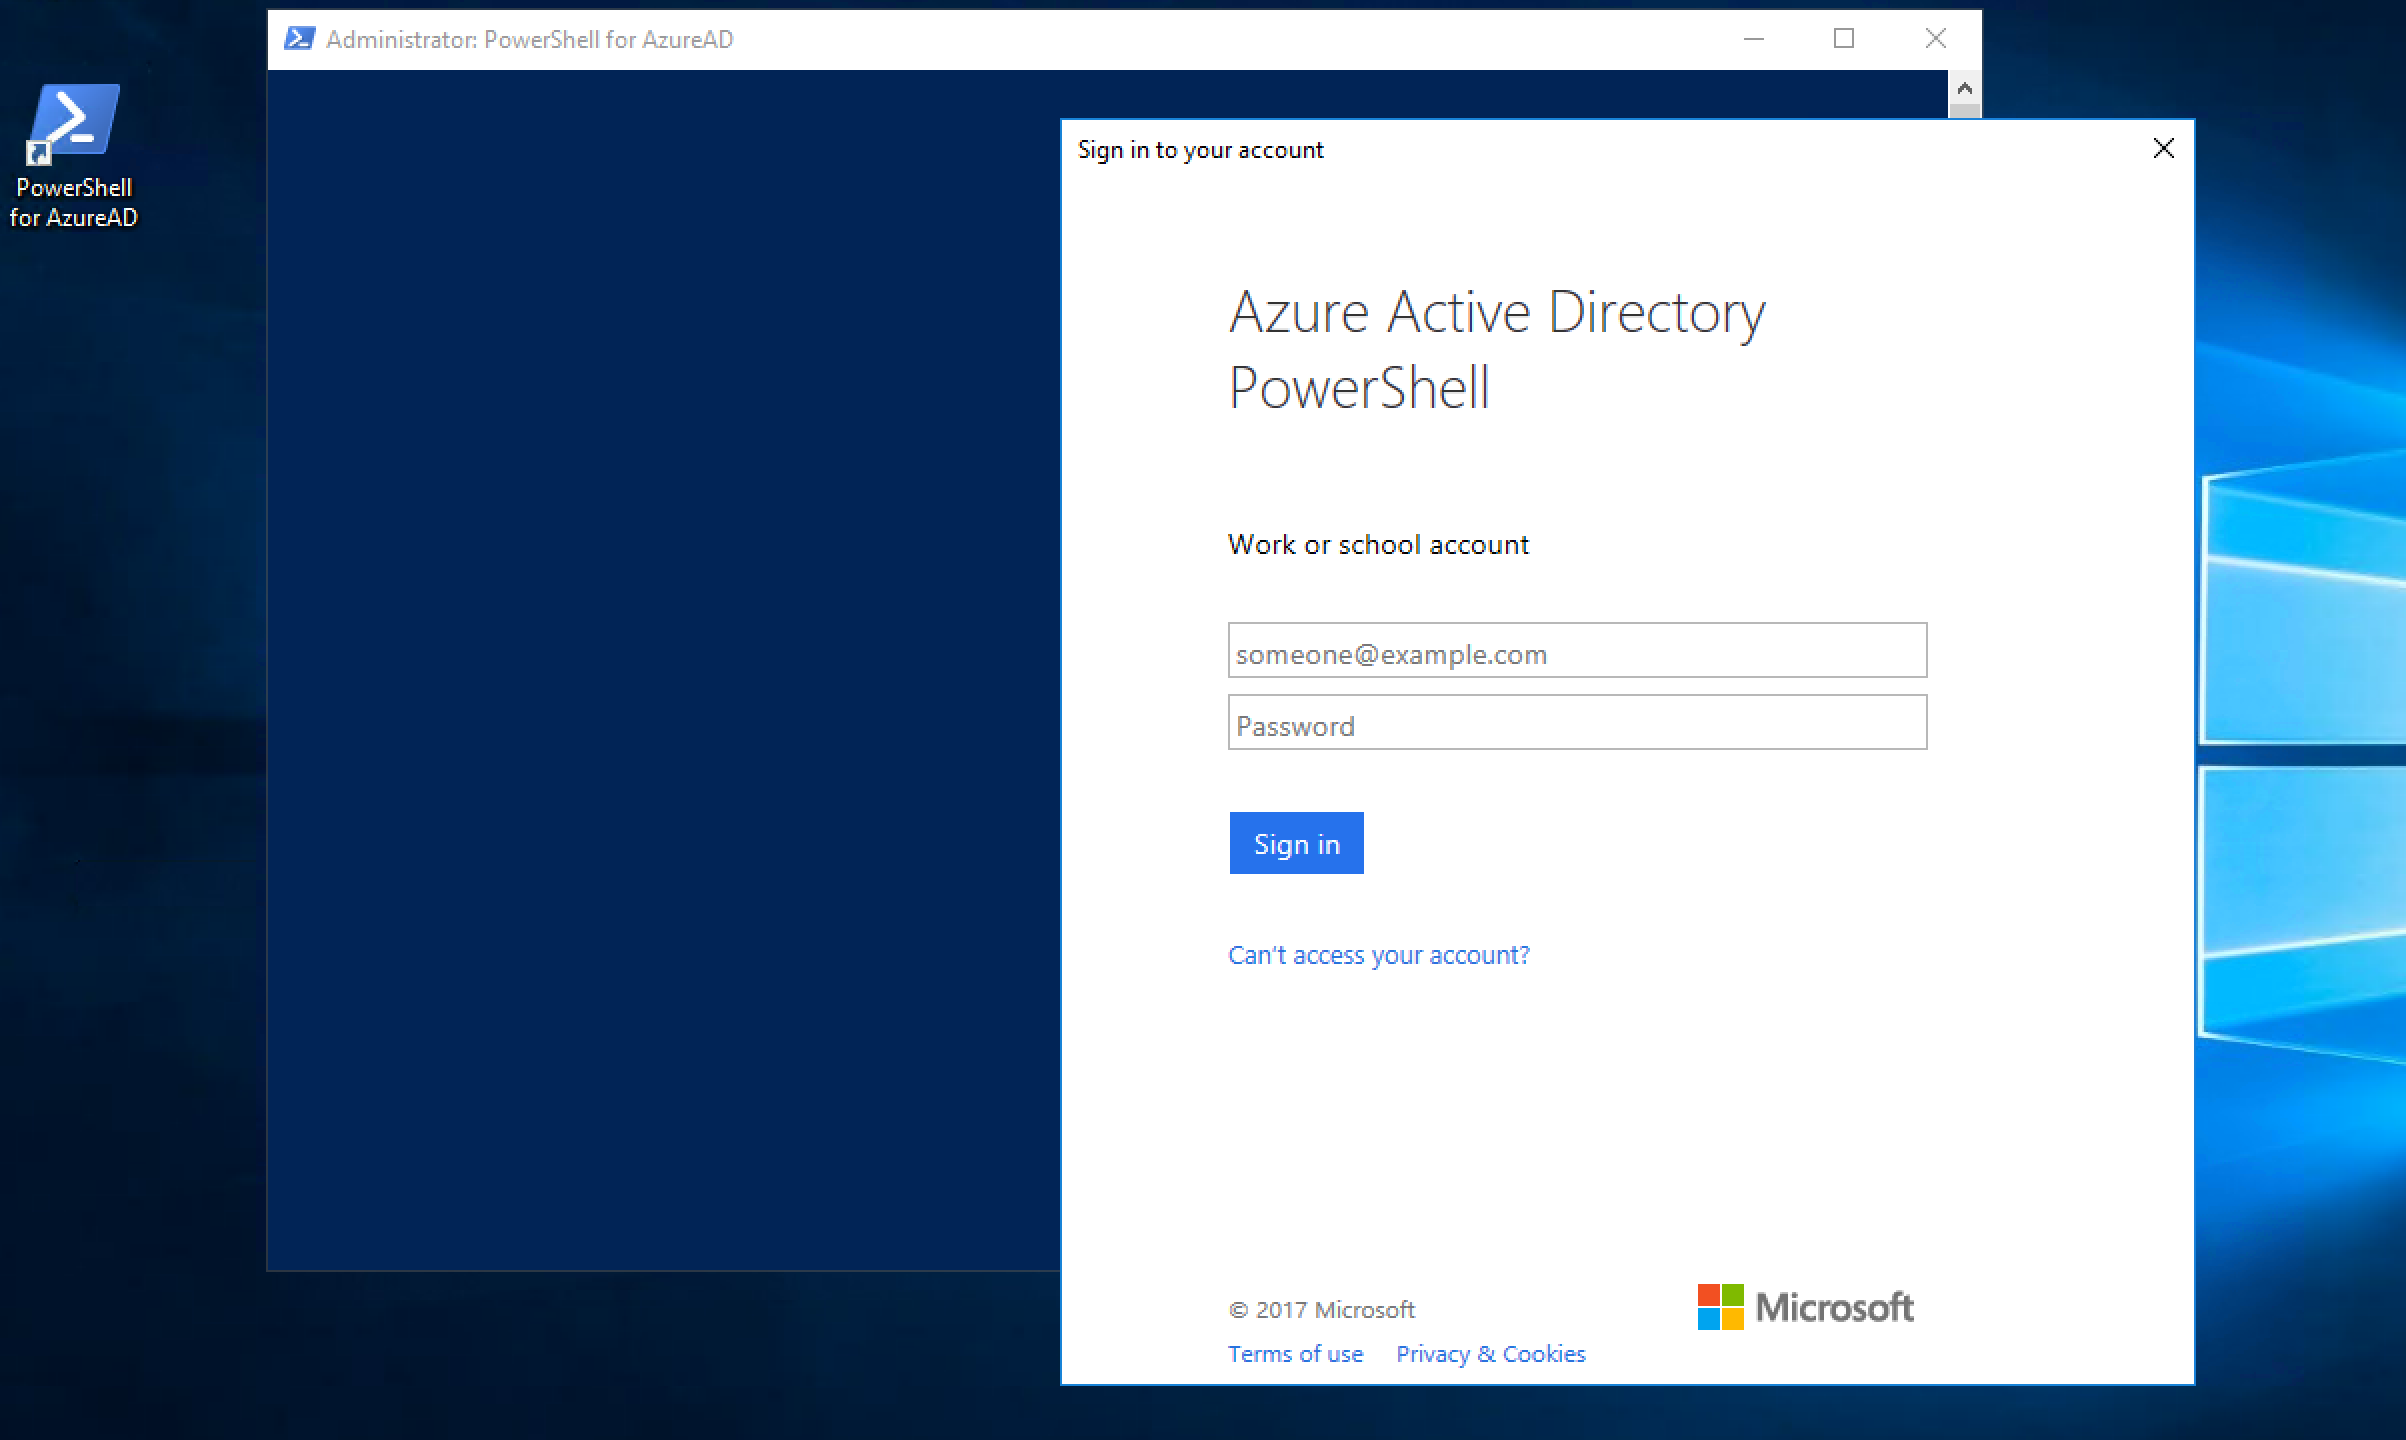 PowerShell for AzureAD Launched